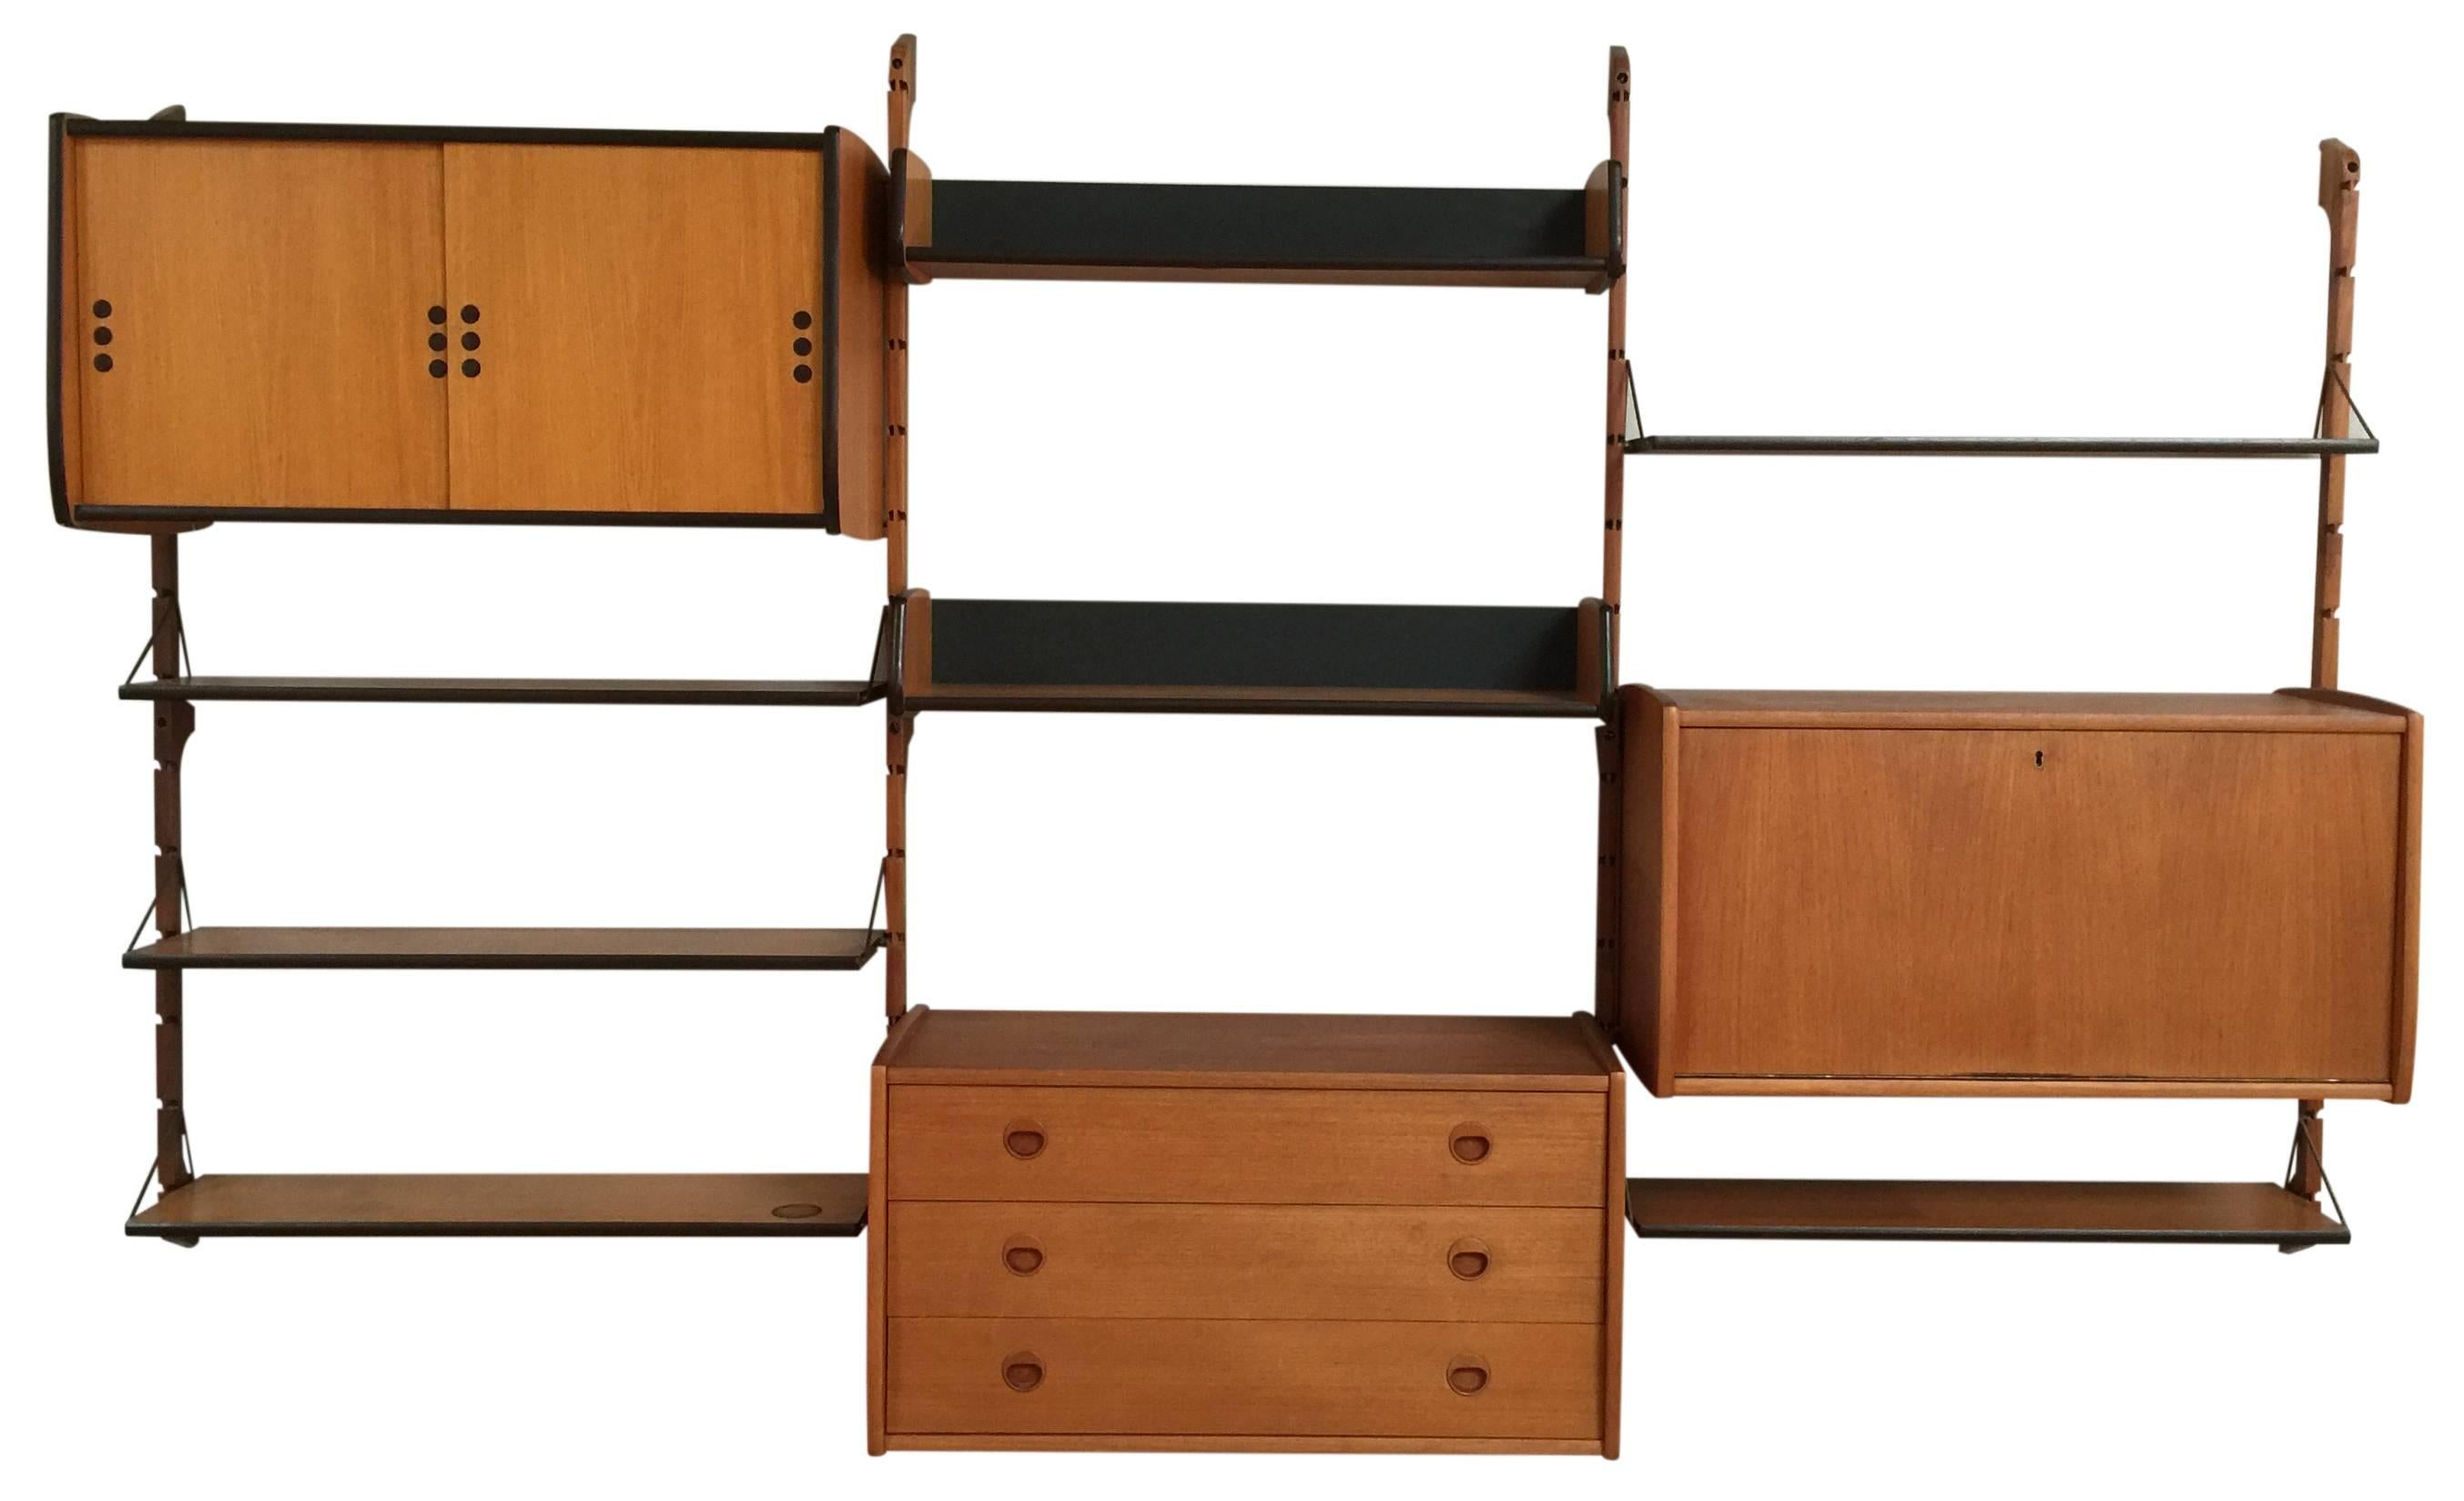 1960s Norwegian ERGO teak modular wall unit system designed by John Texmon for Blindheim Møbelfabrikk. 

The system consists of two short and two long wall-mounted brackets; one dresser box with three drawers, one credenza box with sliding doors,